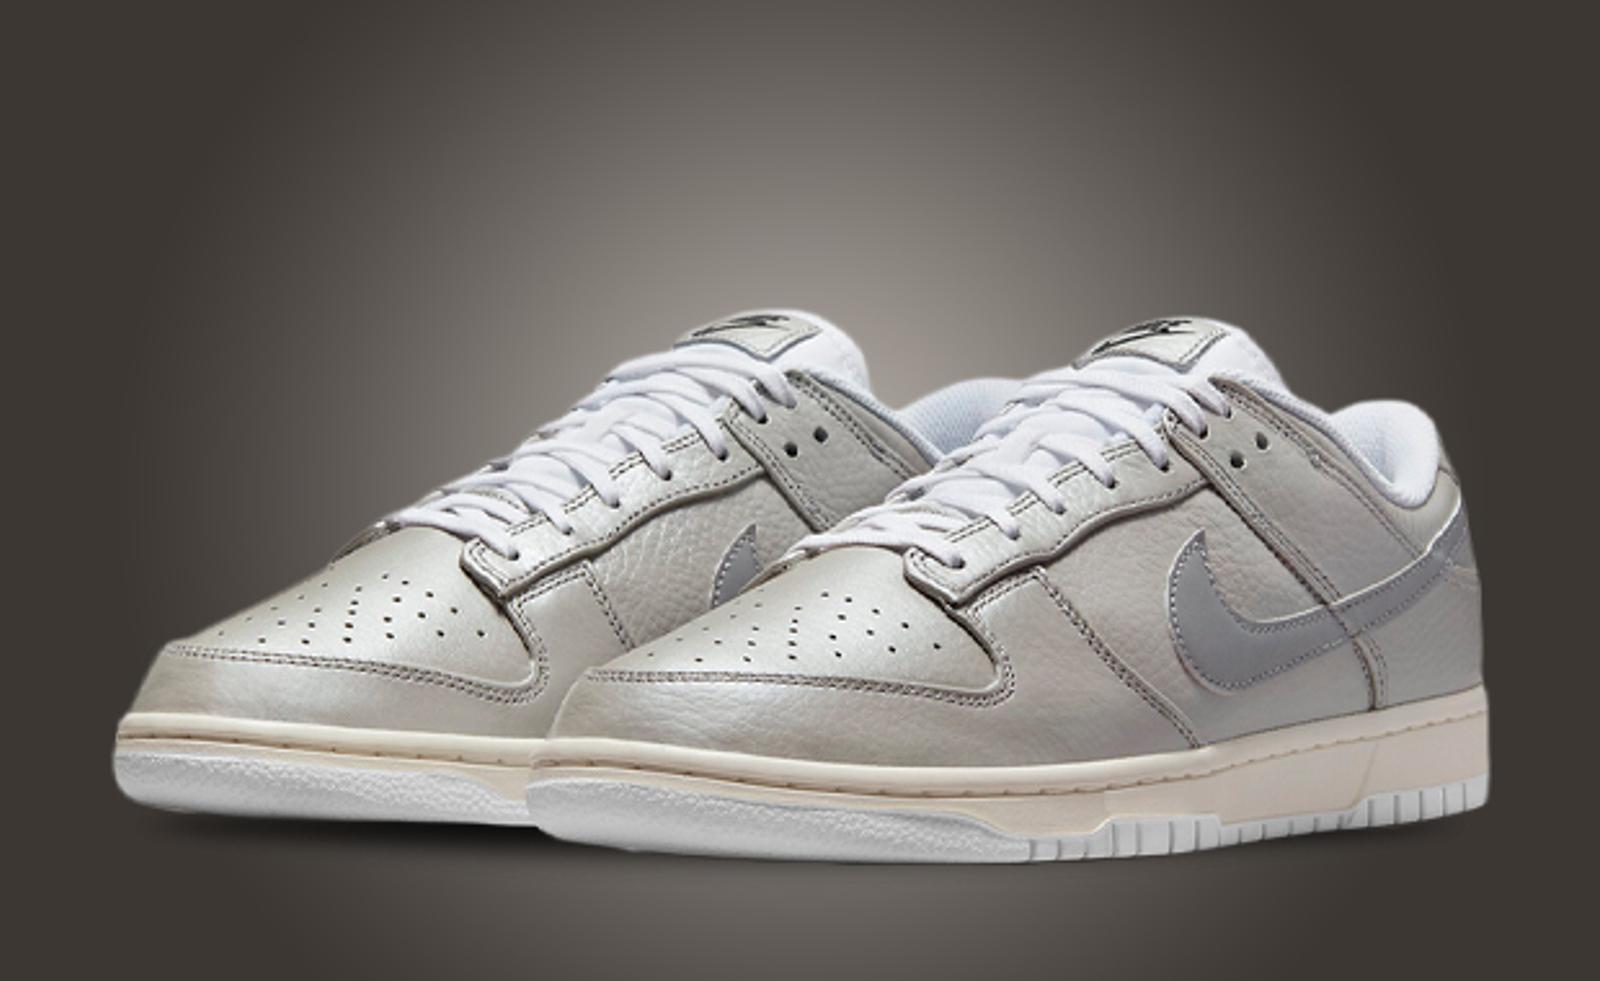 This Nike Dunk Low Gets A Metallic Silver Coating